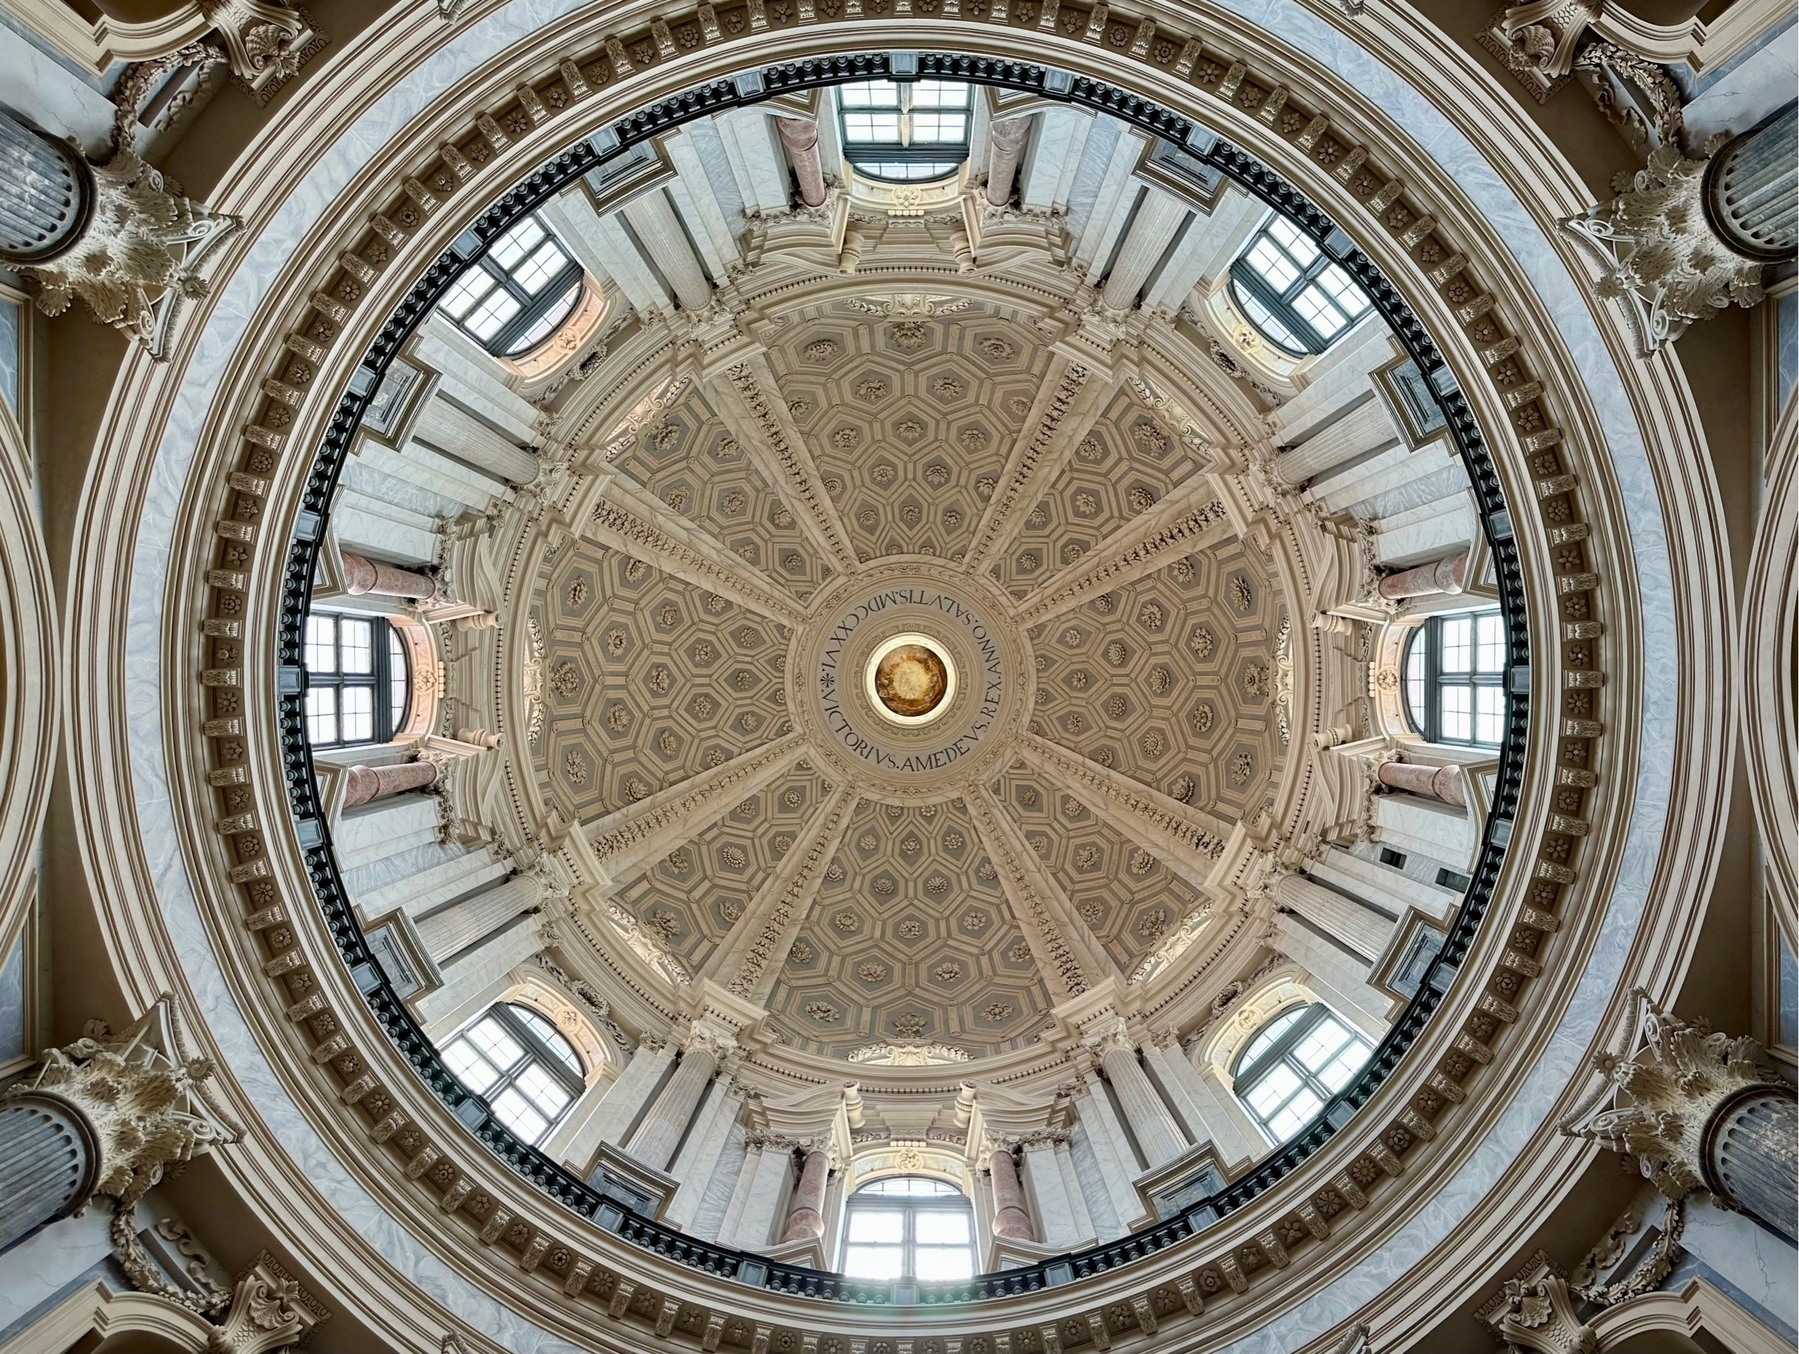 Looking up into a church dome with eight evenly-spaced windows providing the light. Text around the centre gives the year as 1726